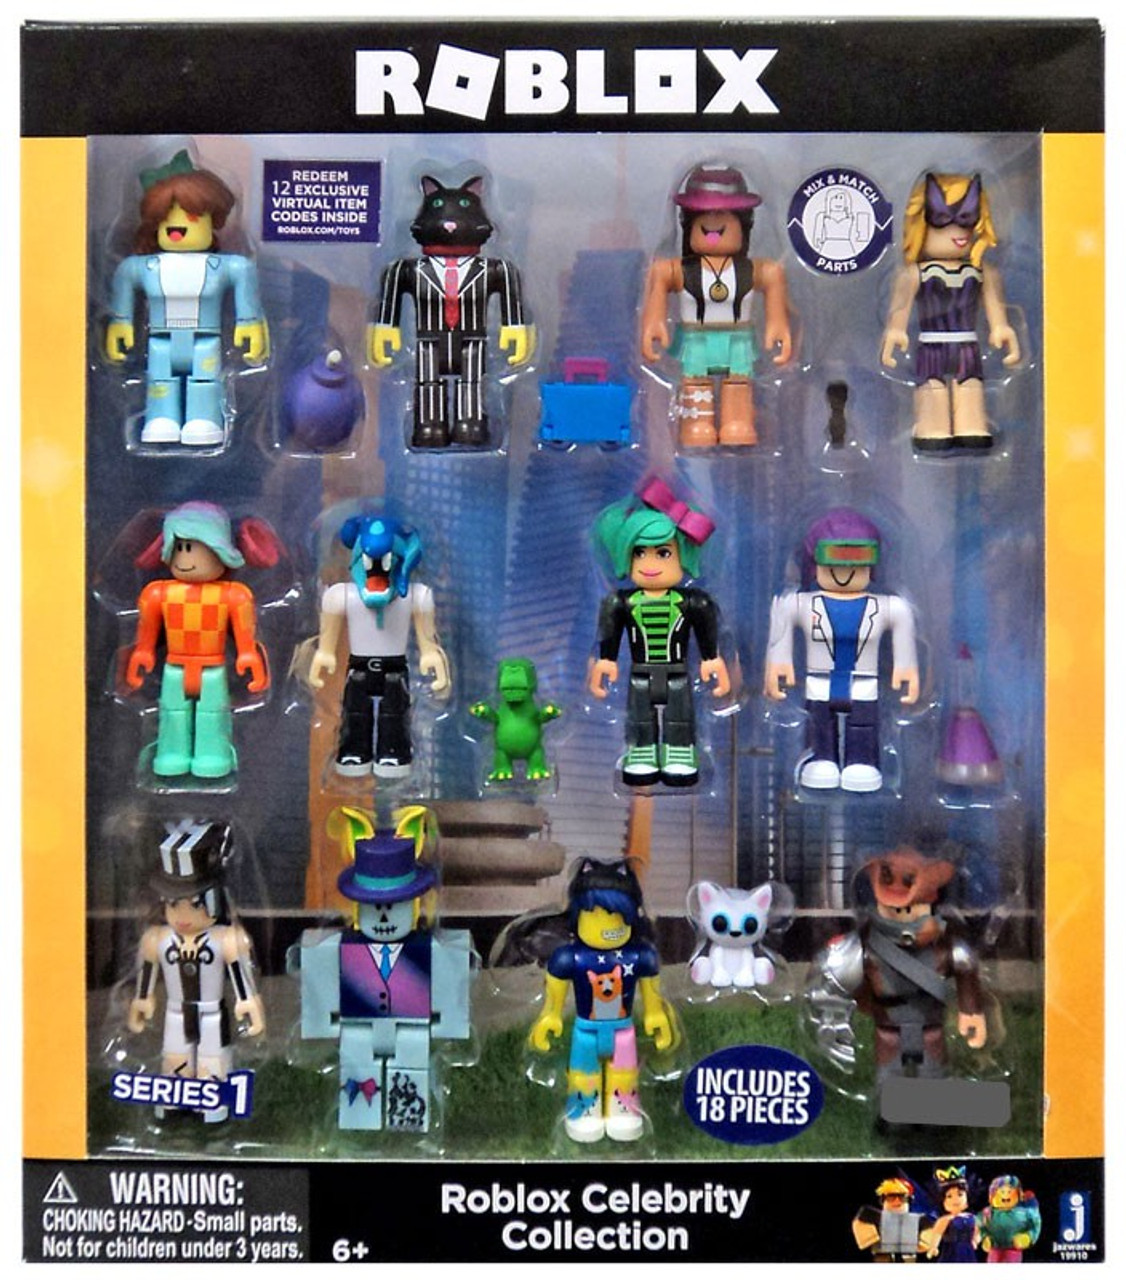 roblox legends of roblox action figure multipack set of 6 figures